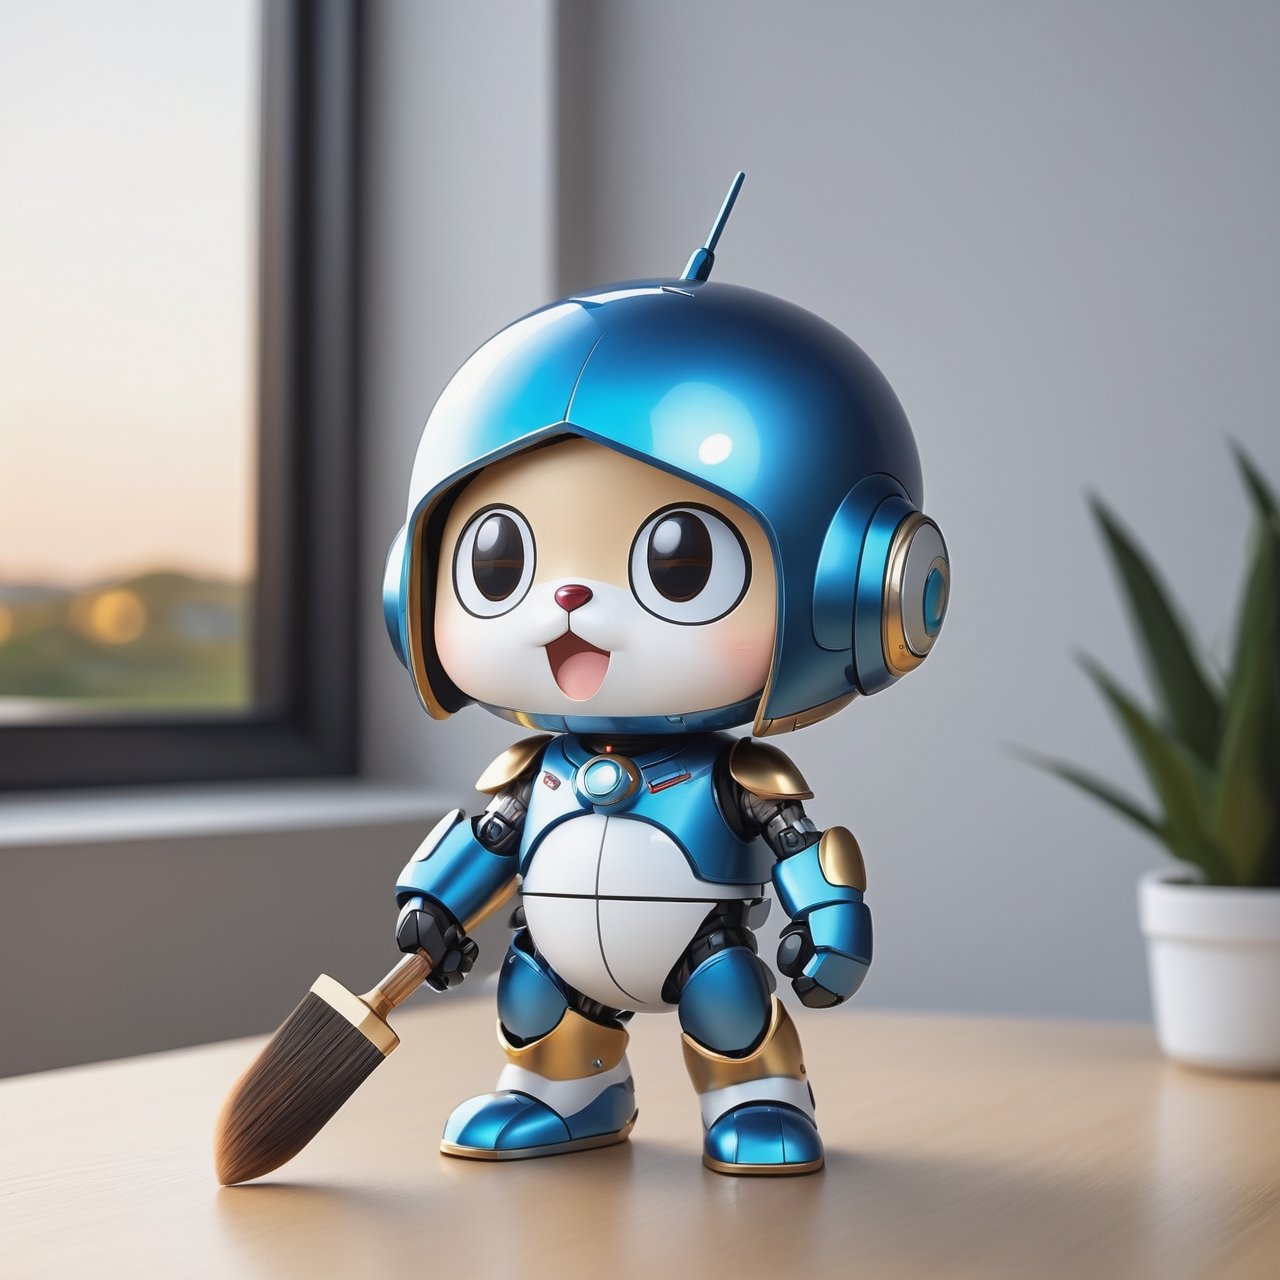 (masterpiece:1.2, highest quality), (realistic, photo_realistic:1.9)
1chibi_robot, Cute chibi robot, Designer look holding a paintbrush in one hand, white with blue, (detailed background), (gradients), colorful, detailed landscape, visual key, shiny skin. Modern place, Action camera. Portrait film. Standard lens. Golden hour lighting.
sharp focus, 8k, UHD, high quality, frowning, intricate detailed, highly detailed, hyper-realistic,interior,doraemon Chibi,chibi emote style